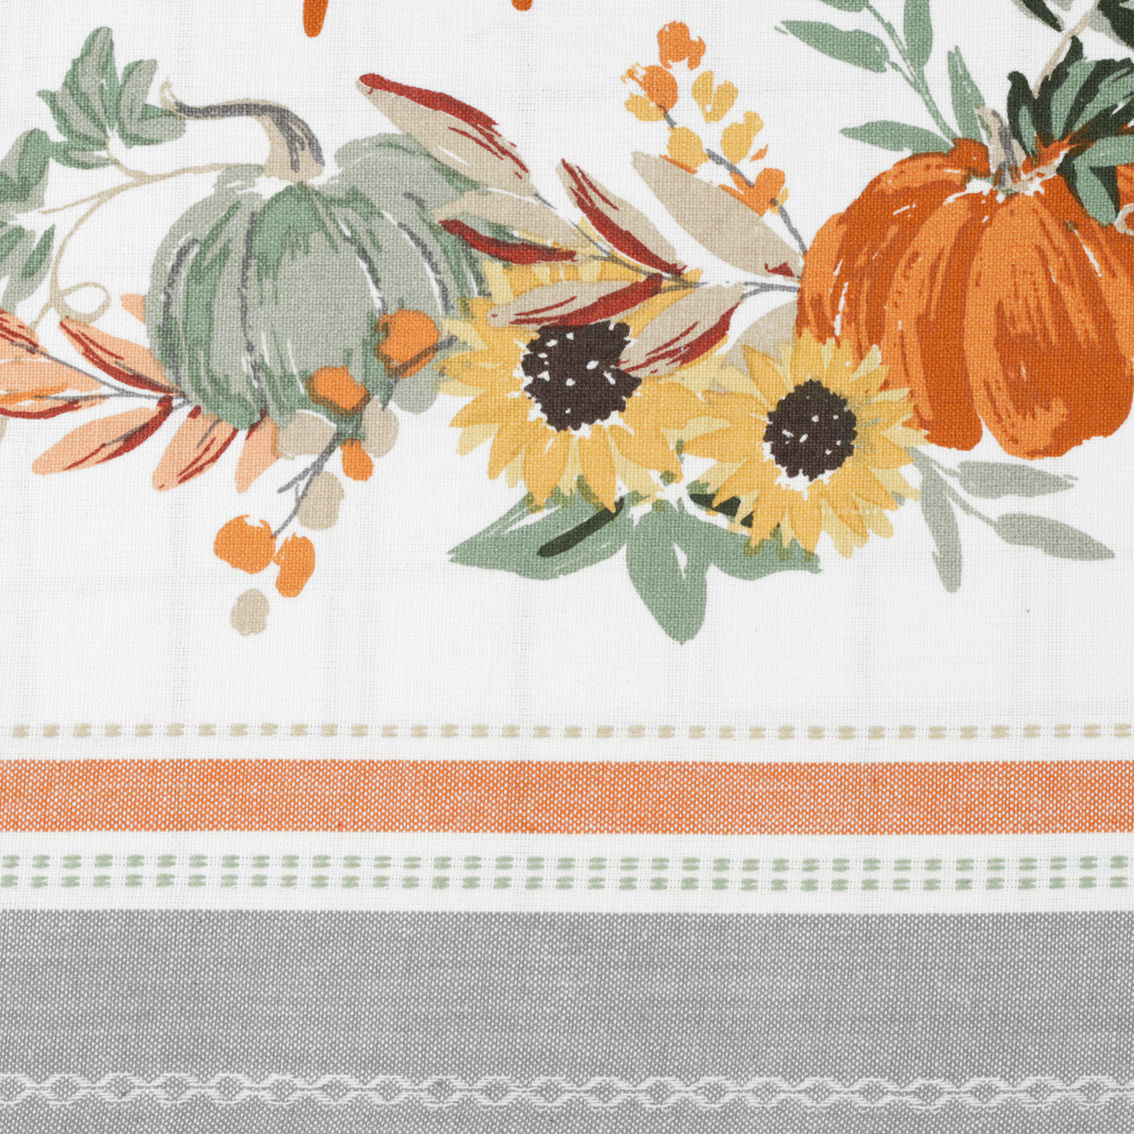 Design Imports 14 x 72 in. Gather Fall Squash Reversible Table Runner - Image 9 of 10